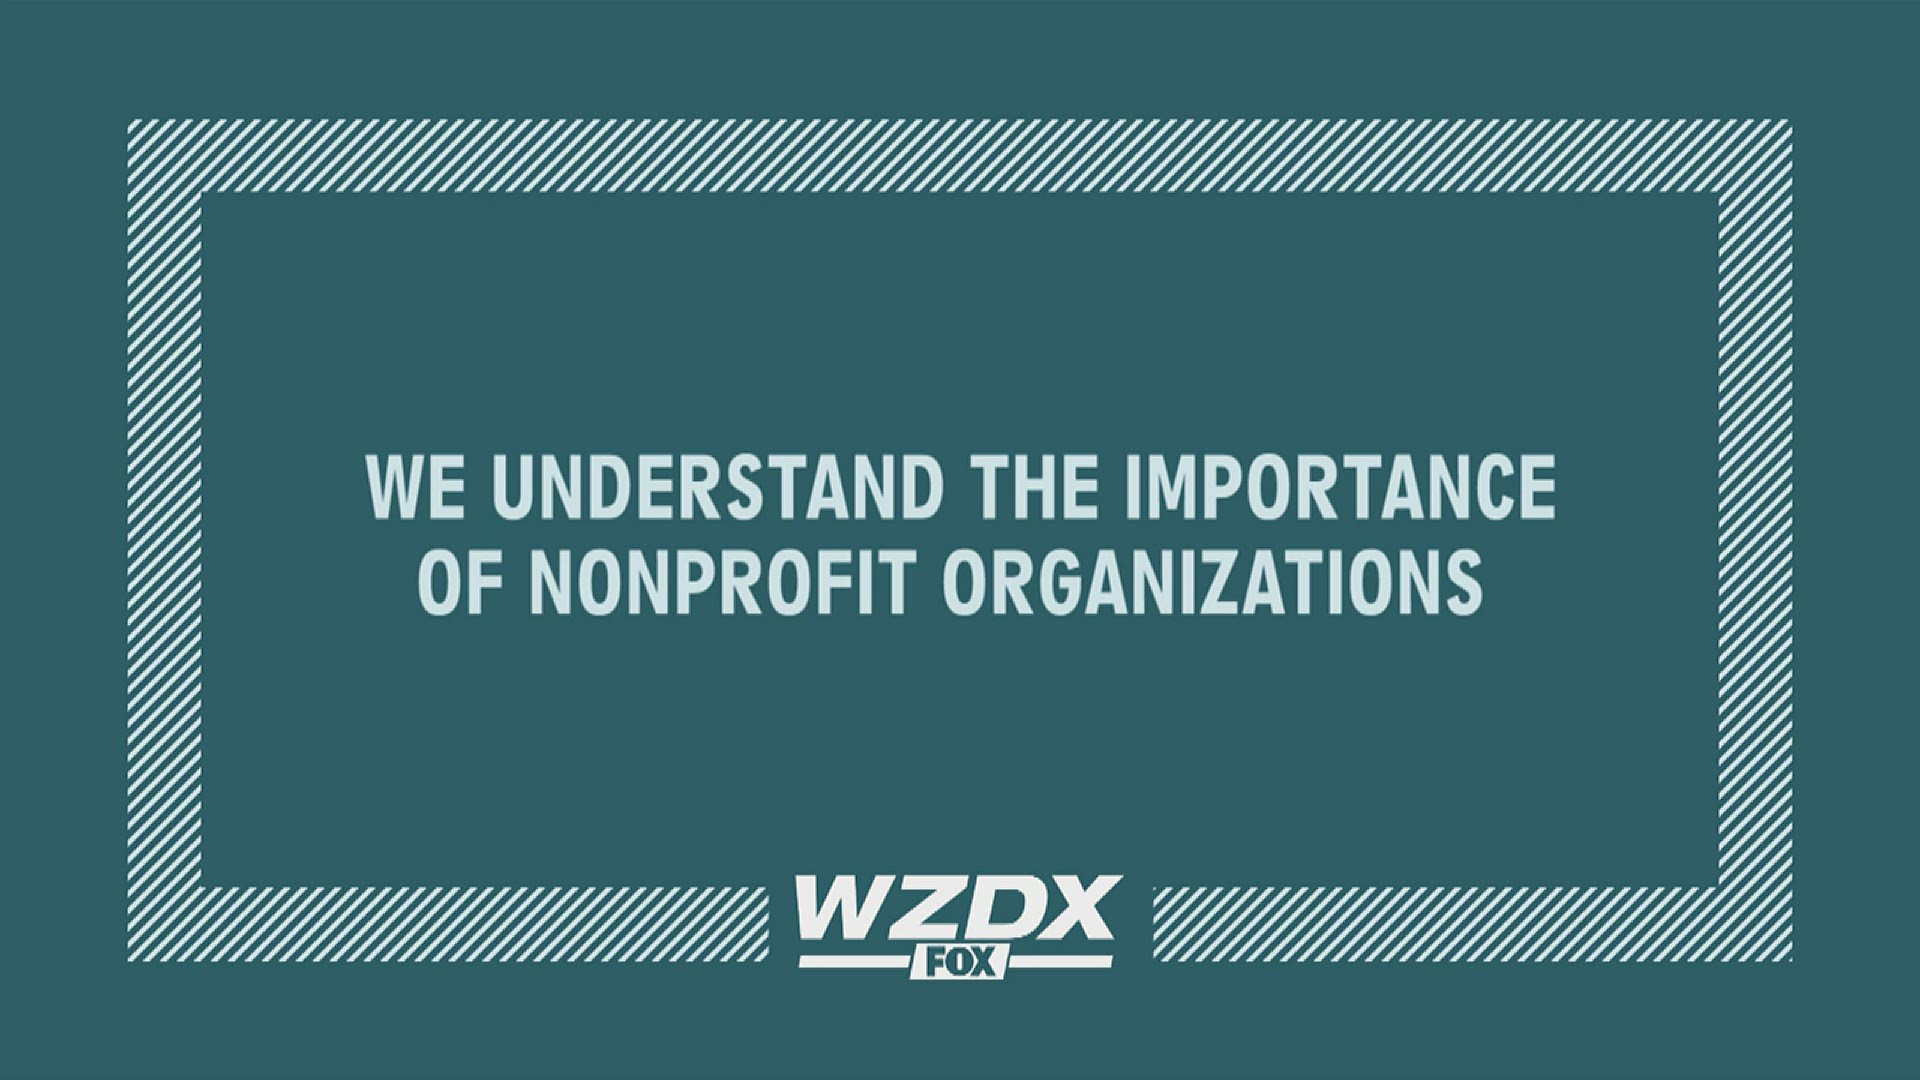 WZDX and TEGNA are seeking grant applications from Tennessee Valley non-profits for our Community Grant program.